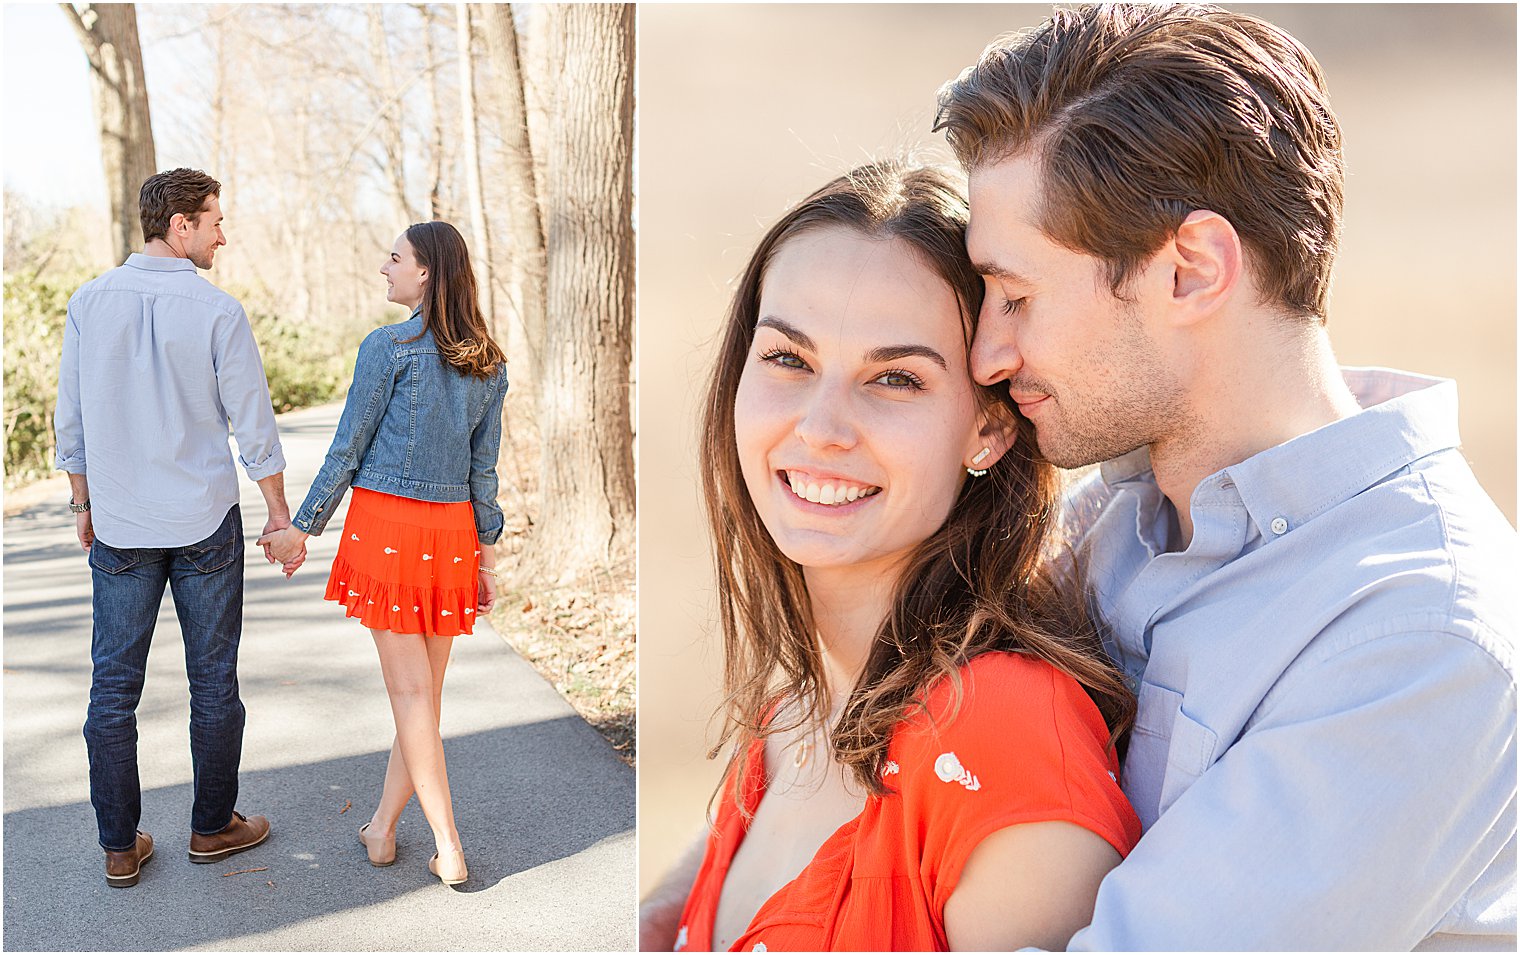 Michael leans into Erica as she smiles at camera and they walk along path during Longwood Gardens Spring Engagement Session